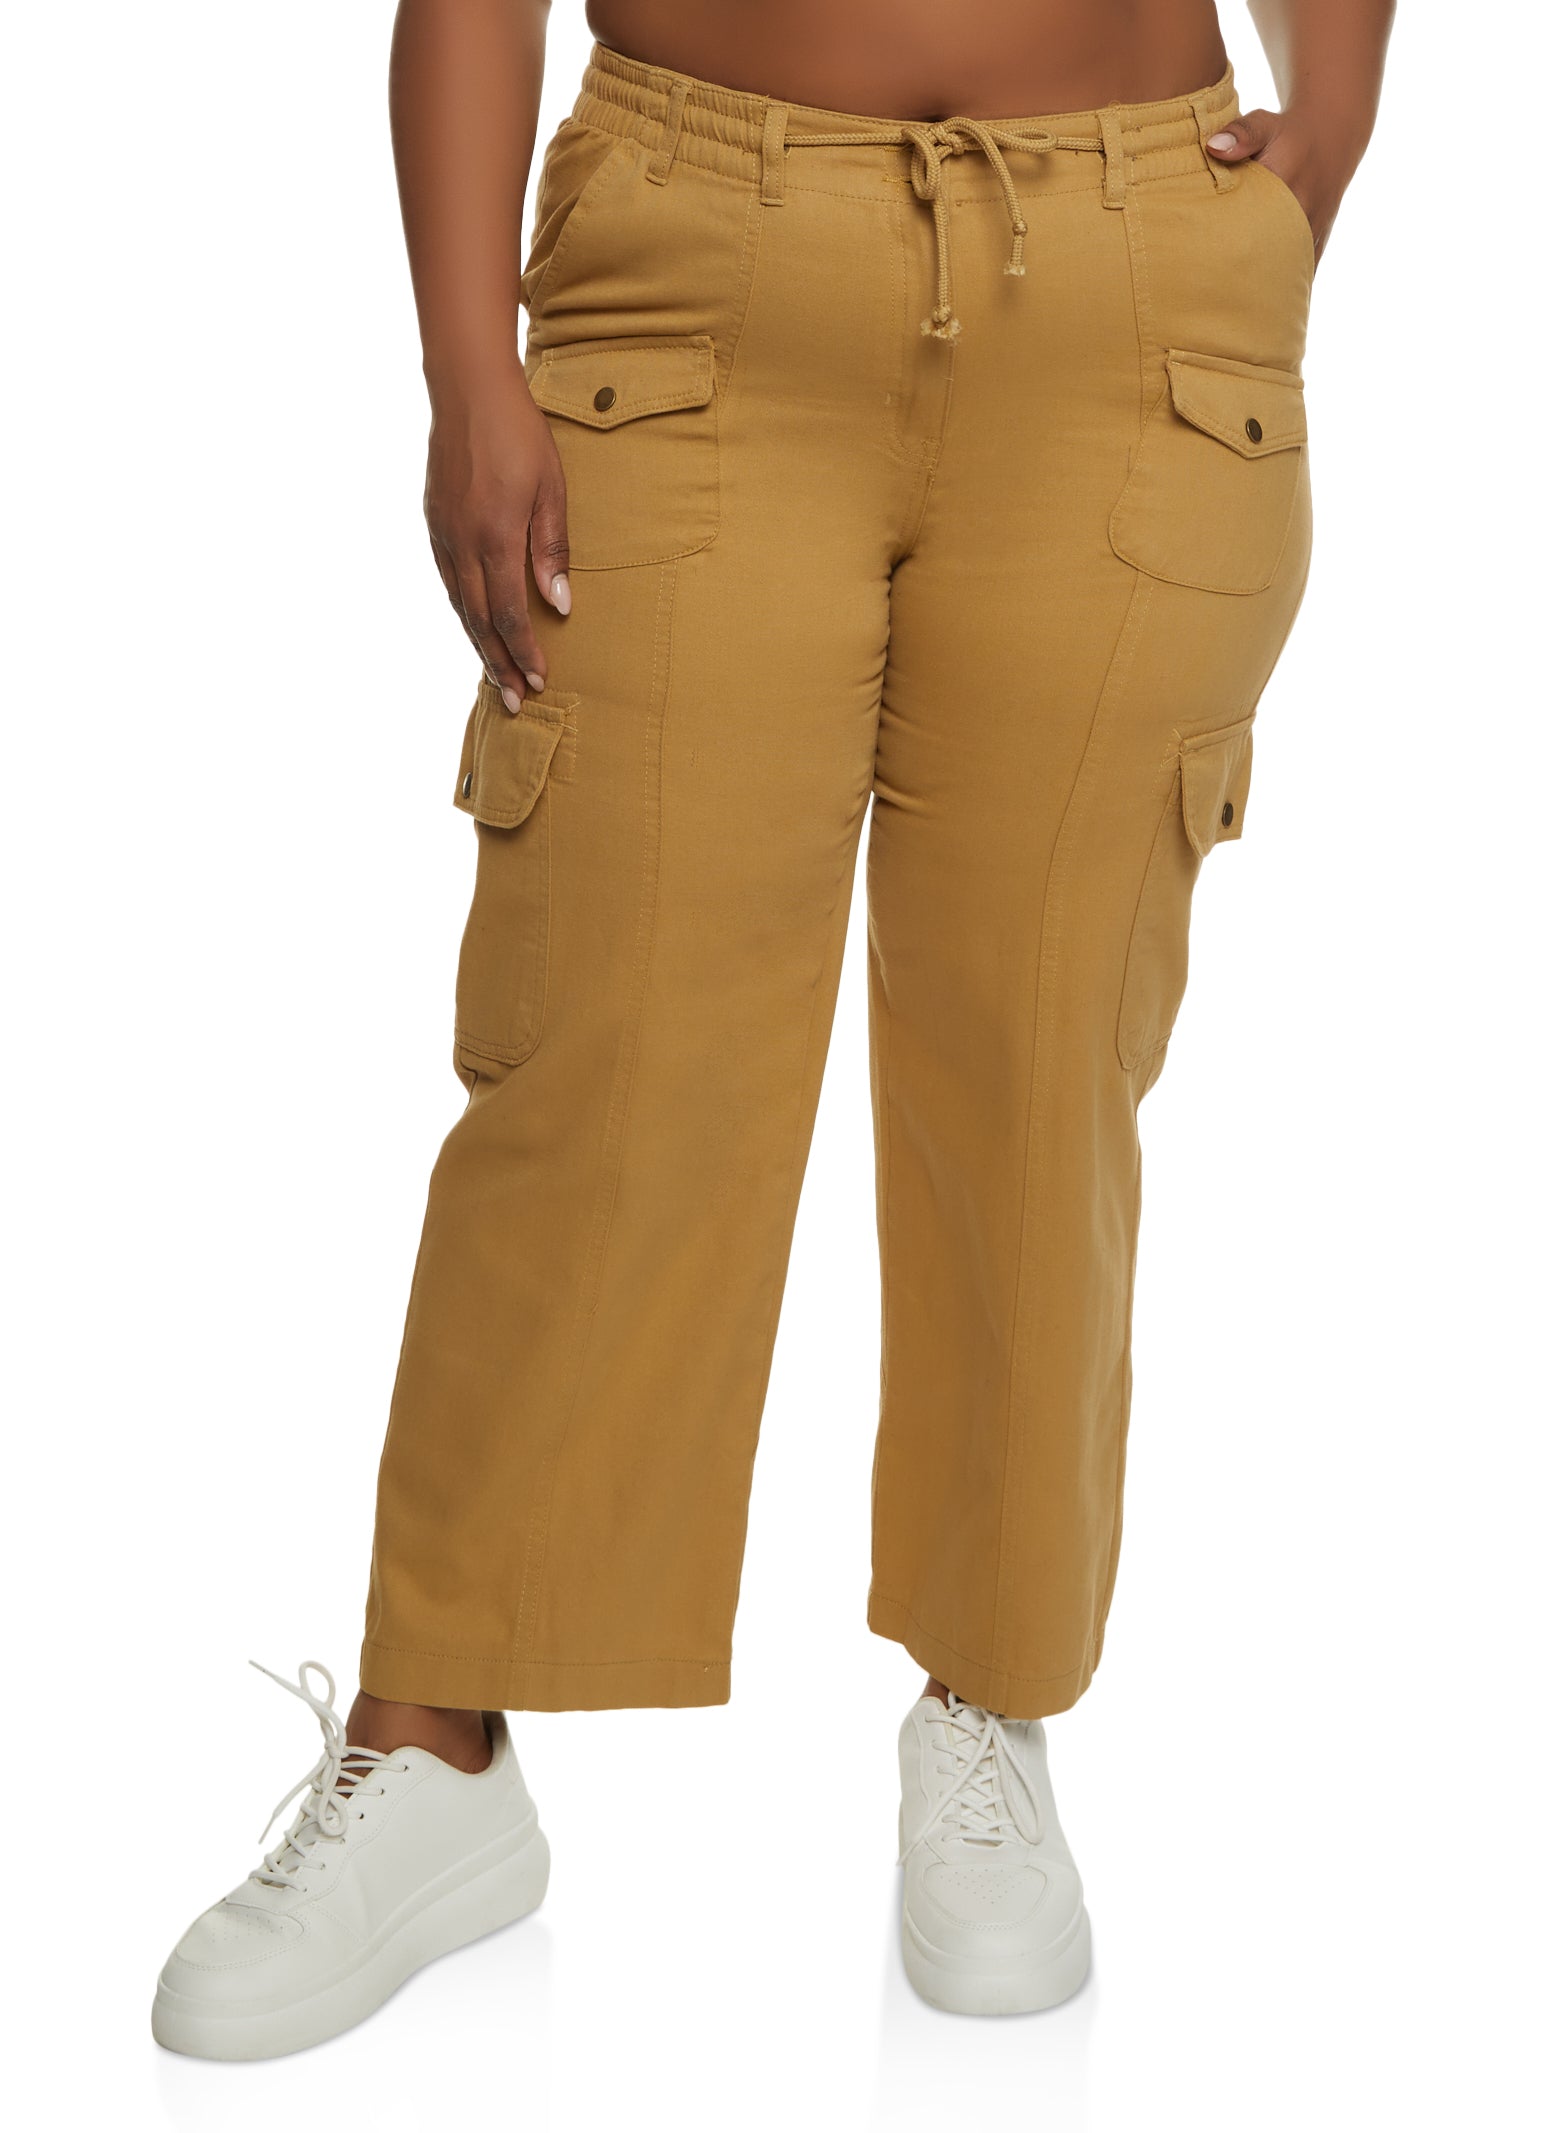 Rainbow Shops Womens Plus Size Hyperstretch Belted Dress Pants